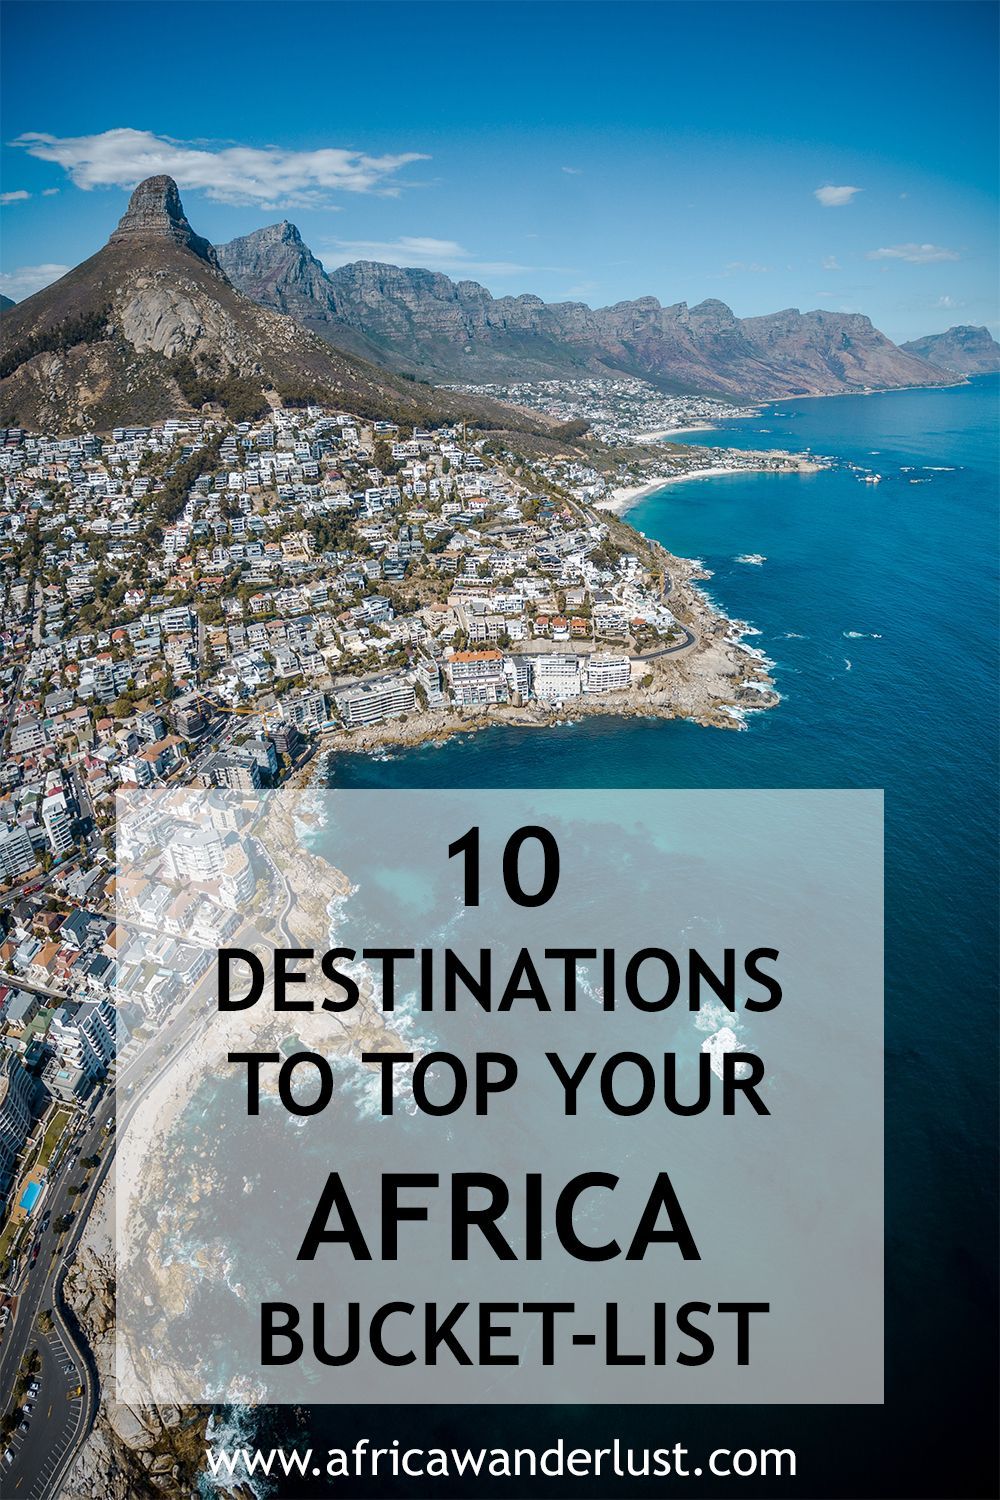 10 Destinations to Top Your Africa Bucket-List -   19 travel destinations Thailand country ideas